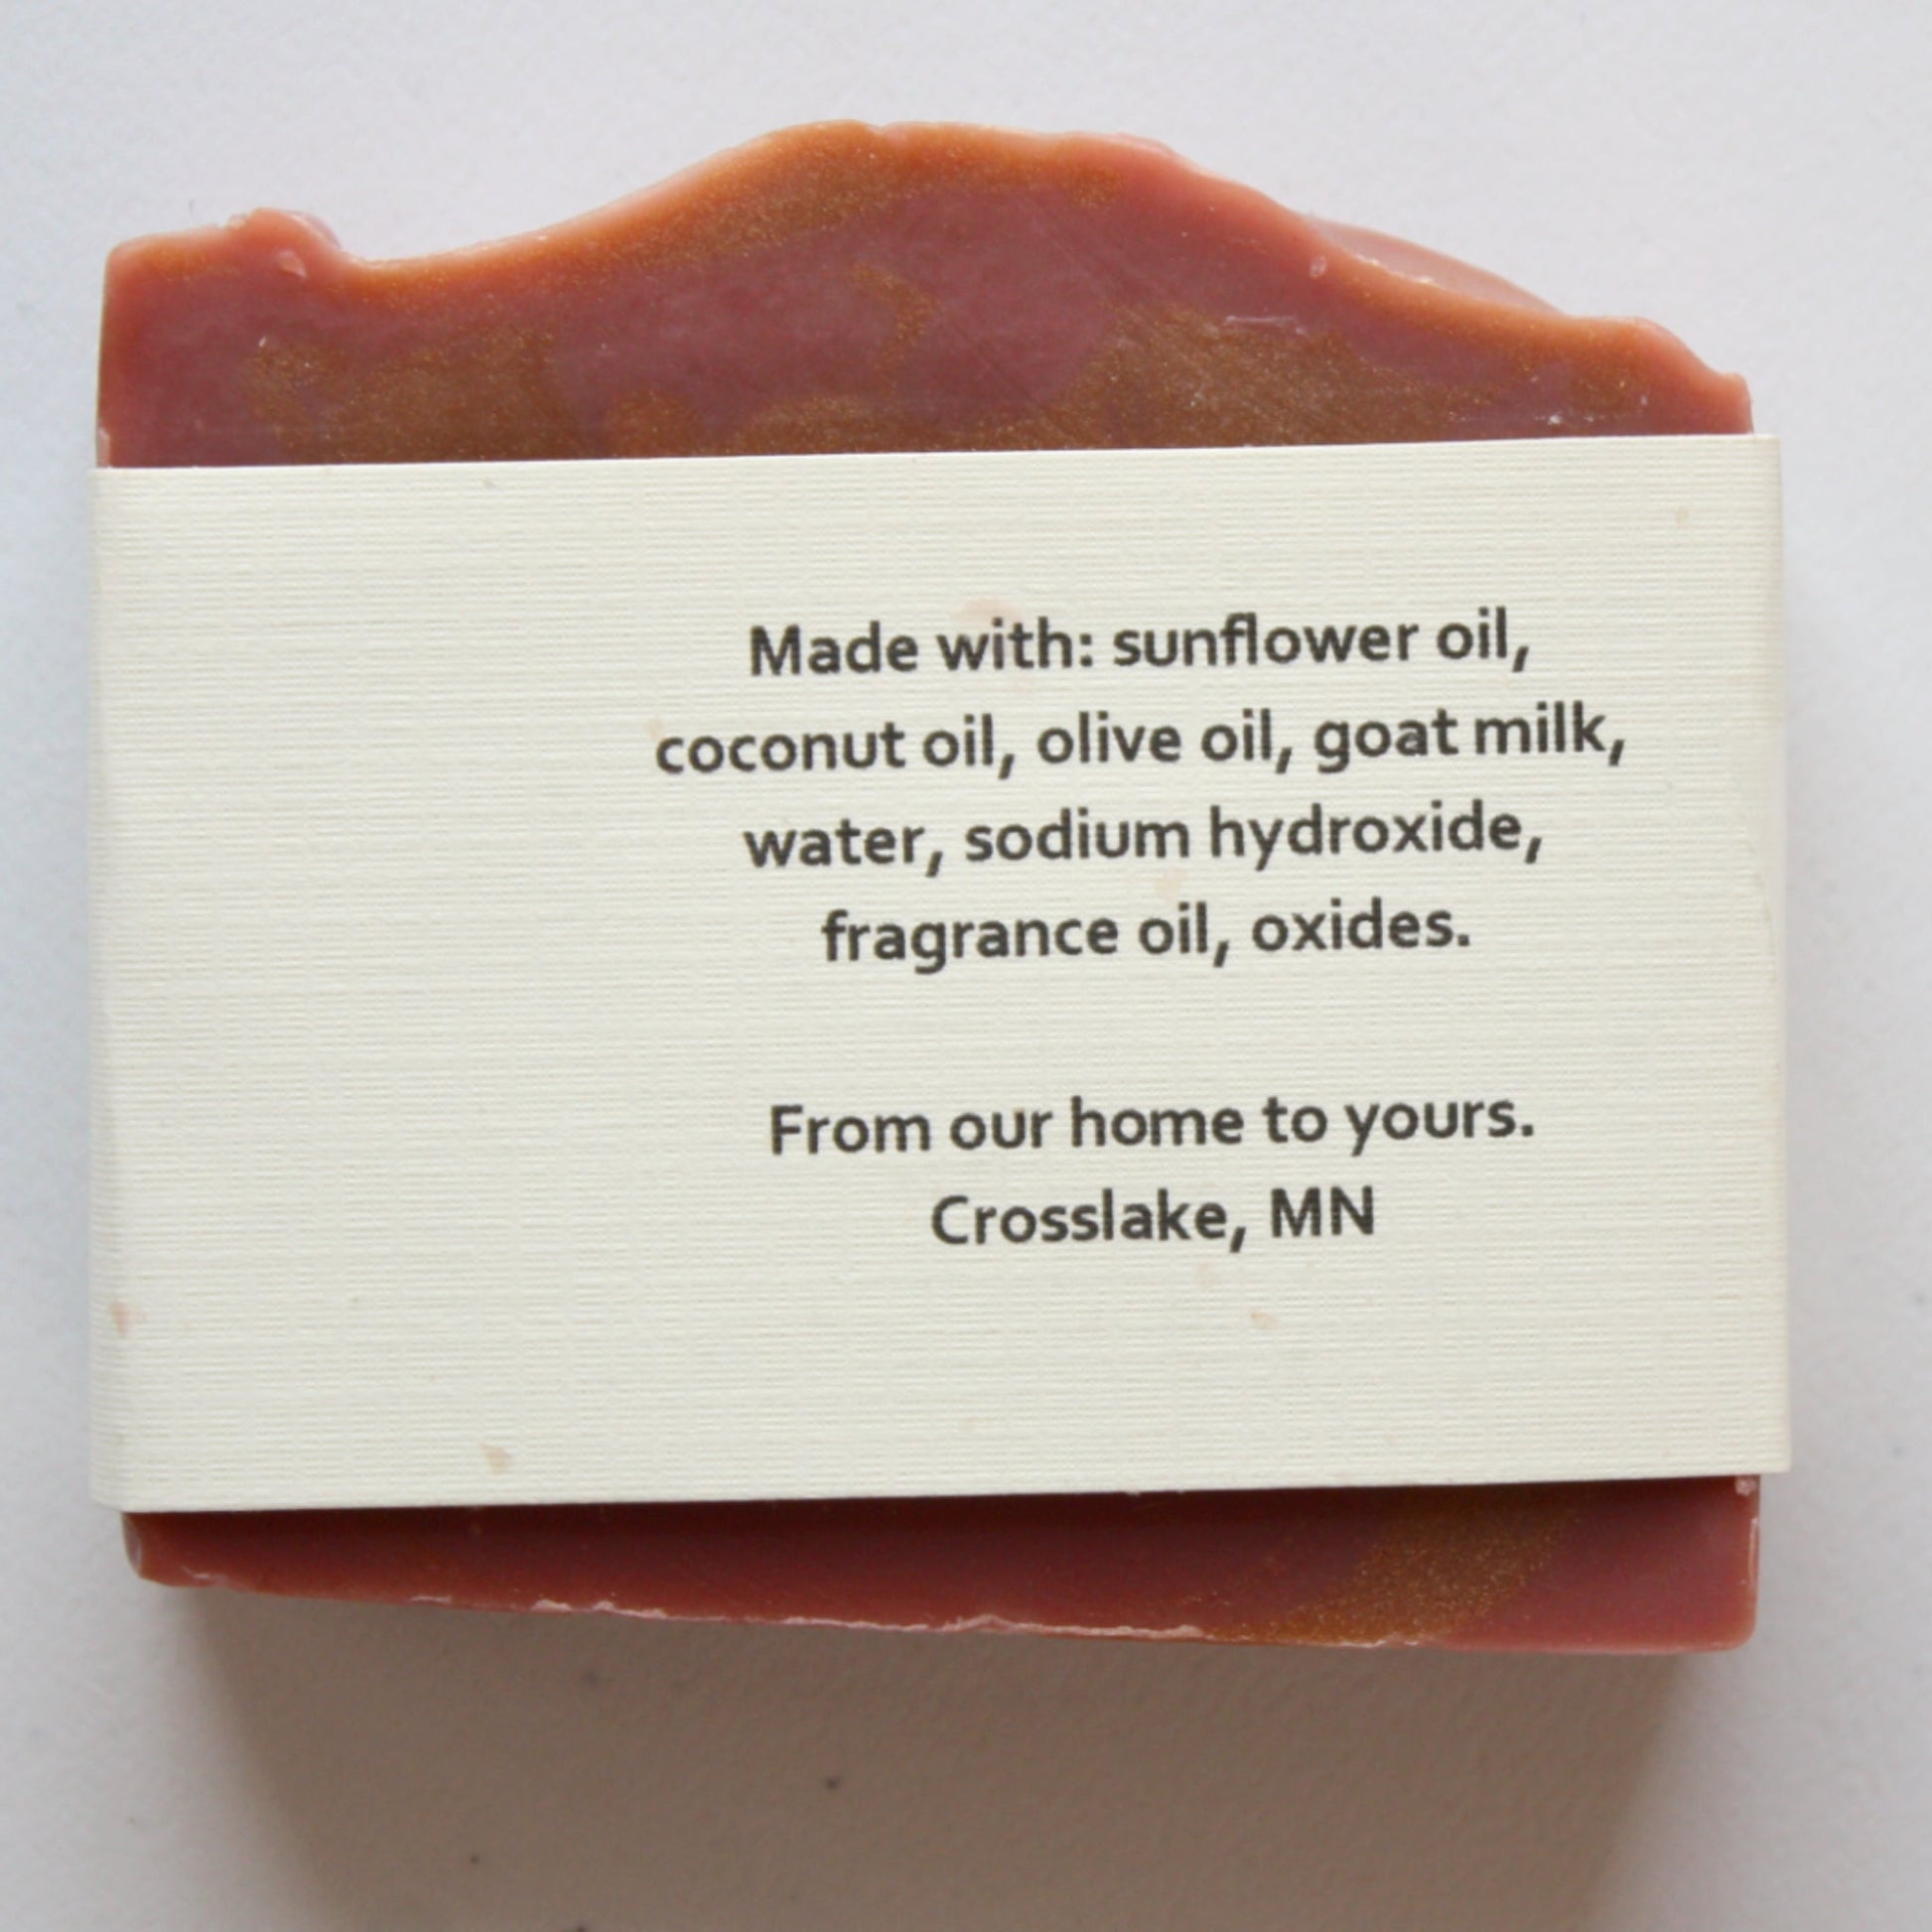 Cherry Almond Handmade Goat Milk Soap - Made in the USA